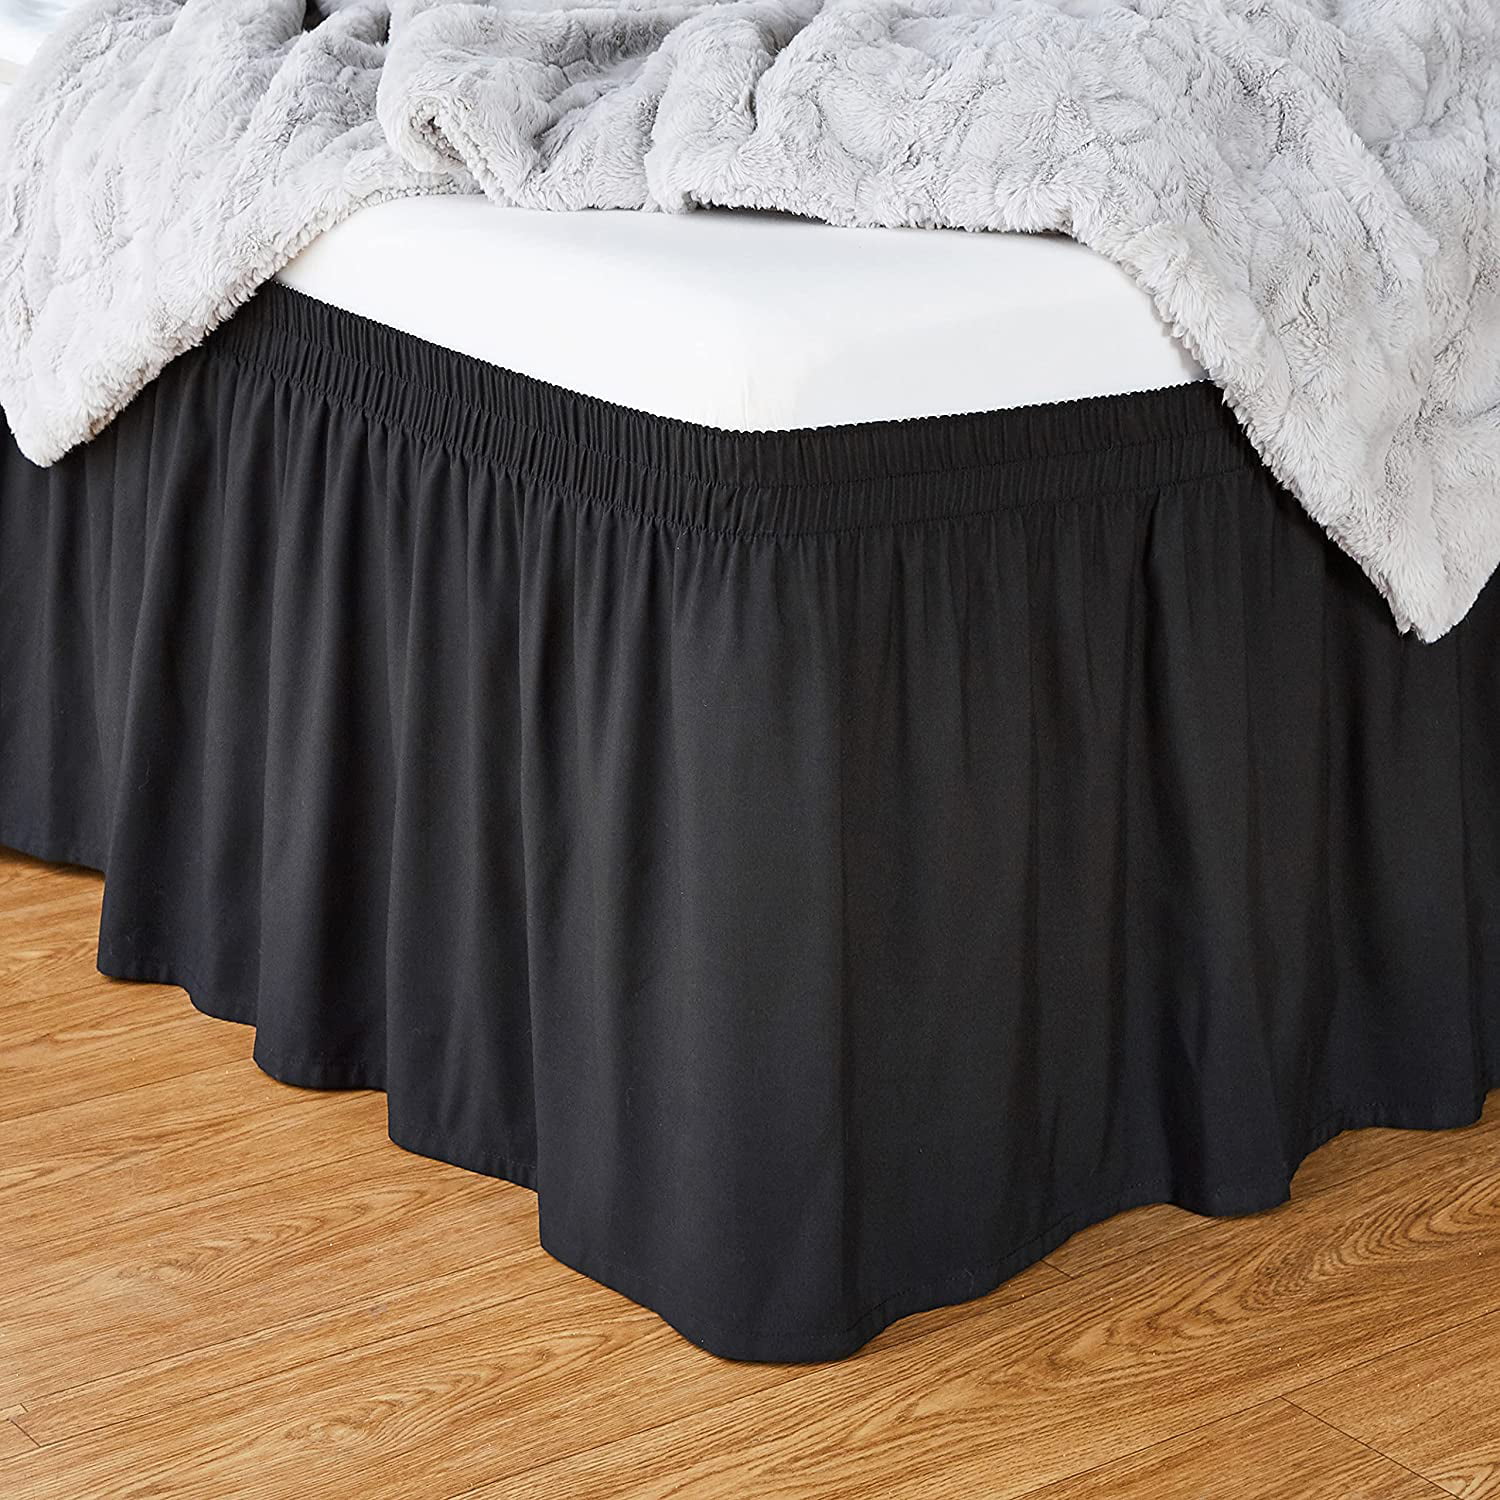 Fancy Linen Elastic Bed Ruffles Bed-Skirt 17" Drop Solid Black All Sizes New 